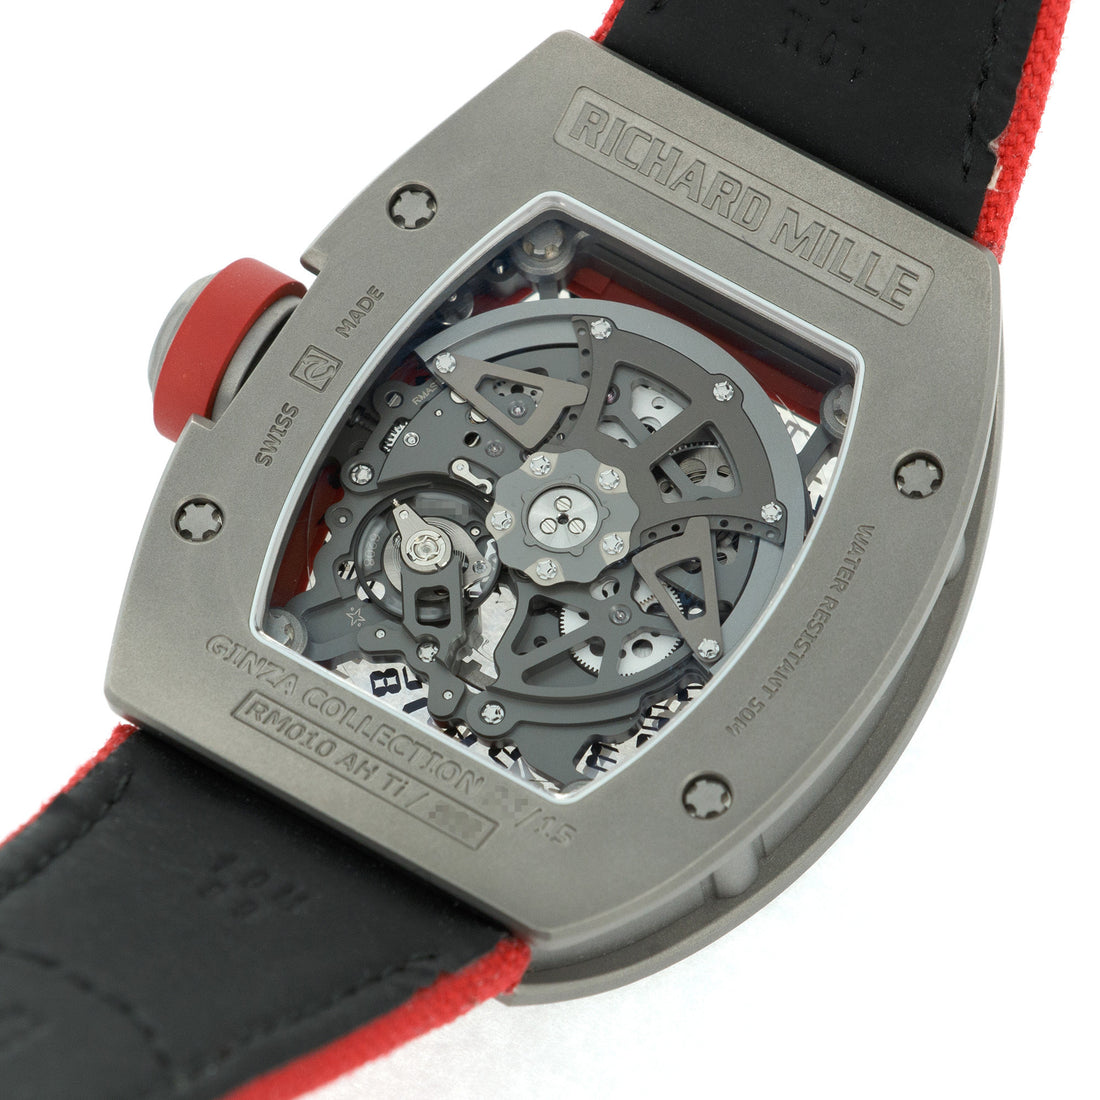 Richard Mille RM010 Titanium, Limited Ginza Collection of 15